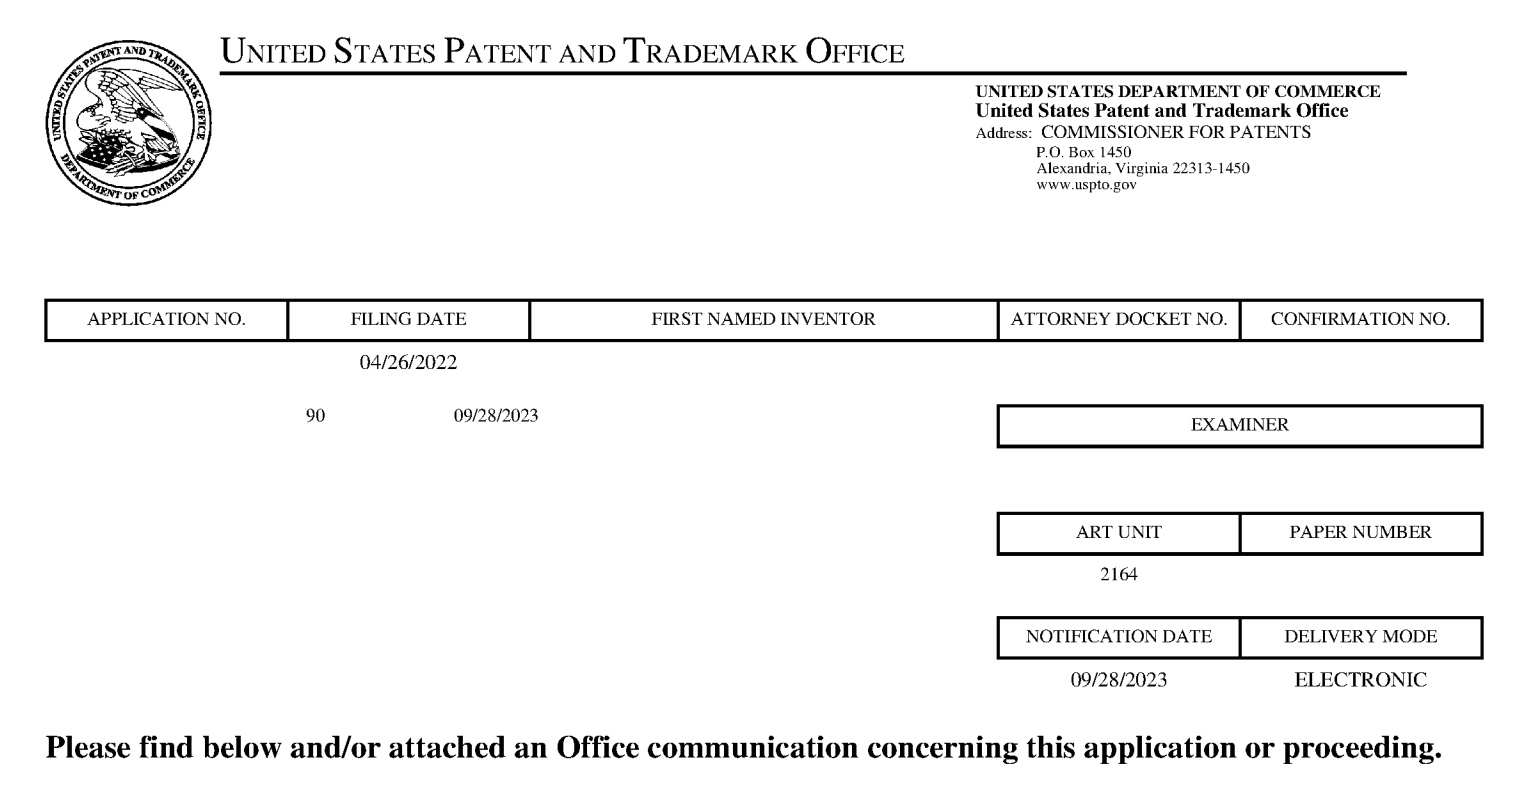 AI based office action responses' and 'AI based patent drafting'